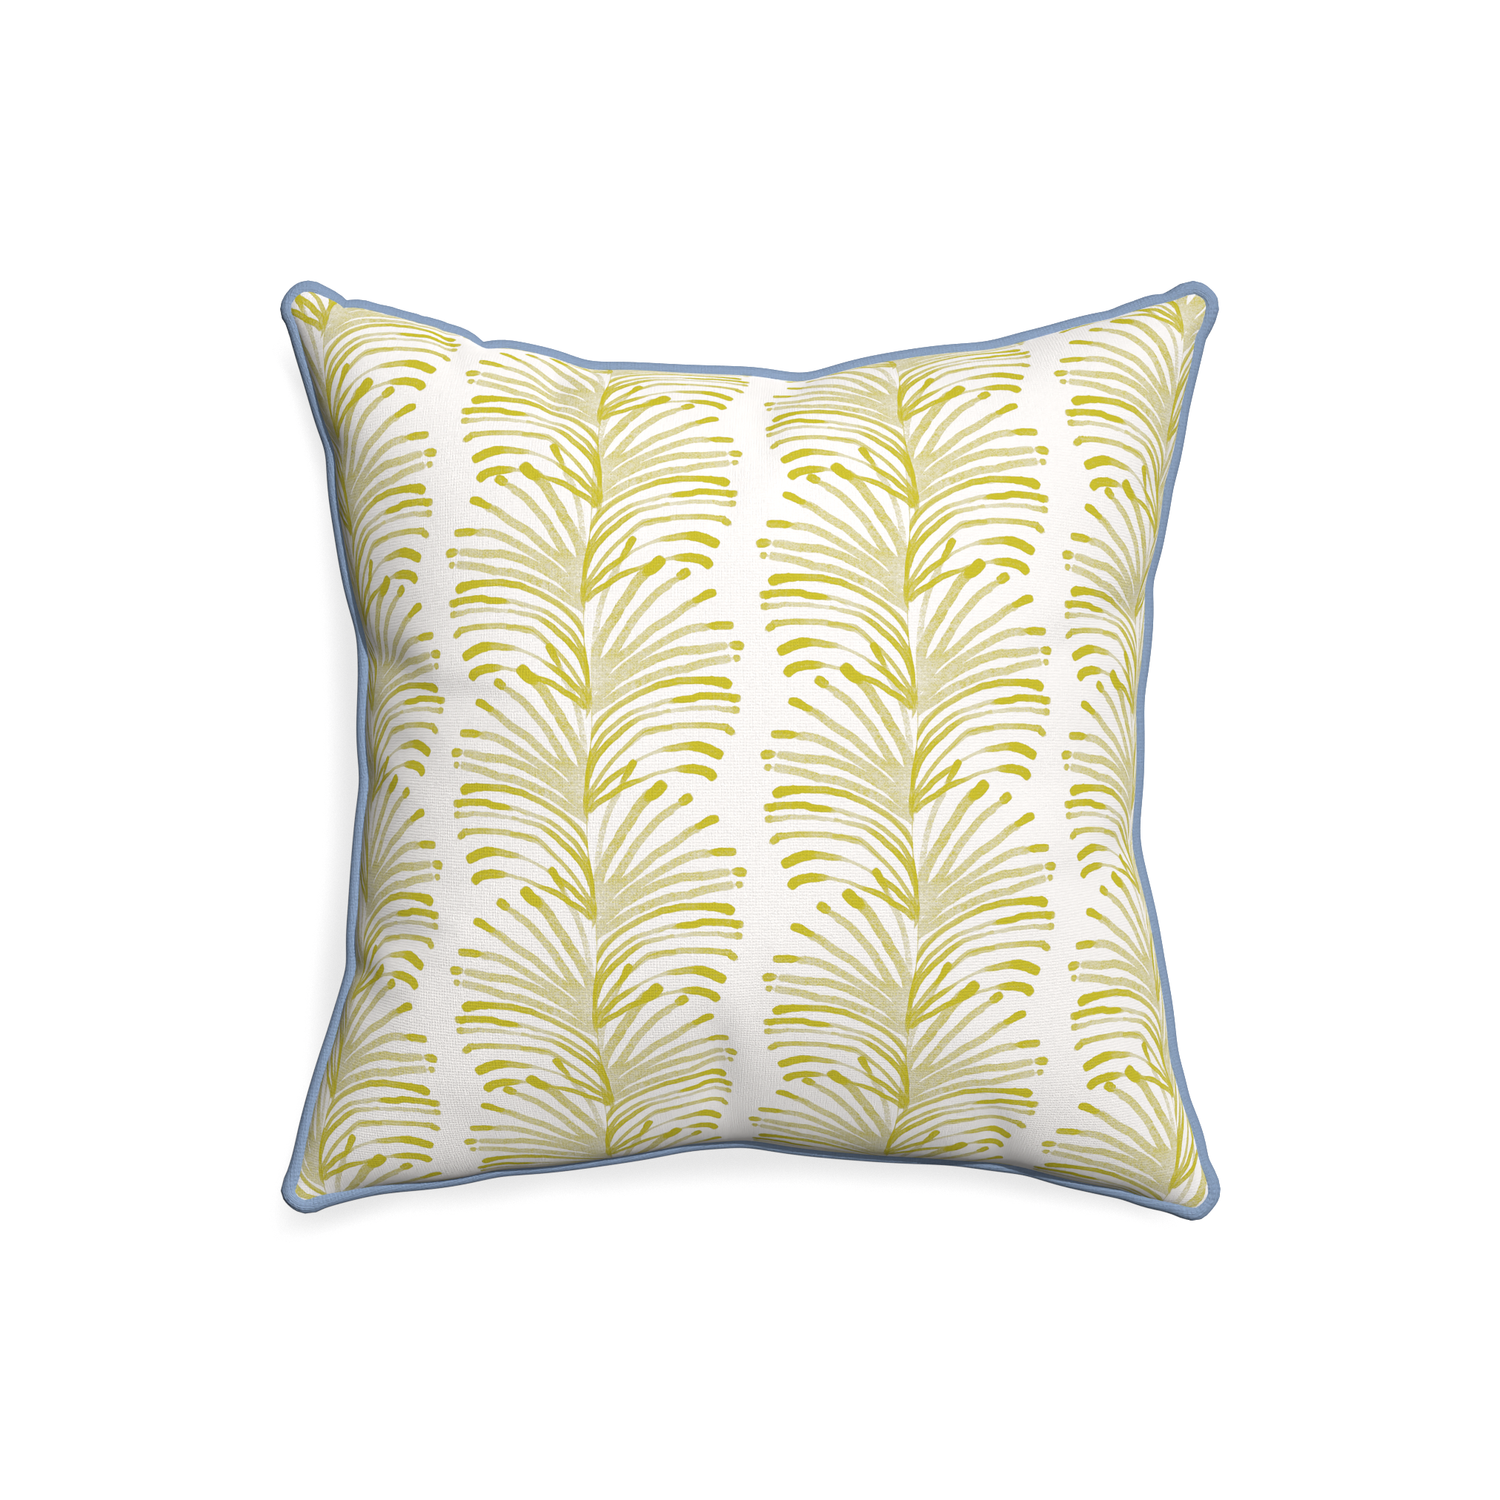 20-square emma chartreuse custom yellow stripe chartreusepillow with sky piping on white background